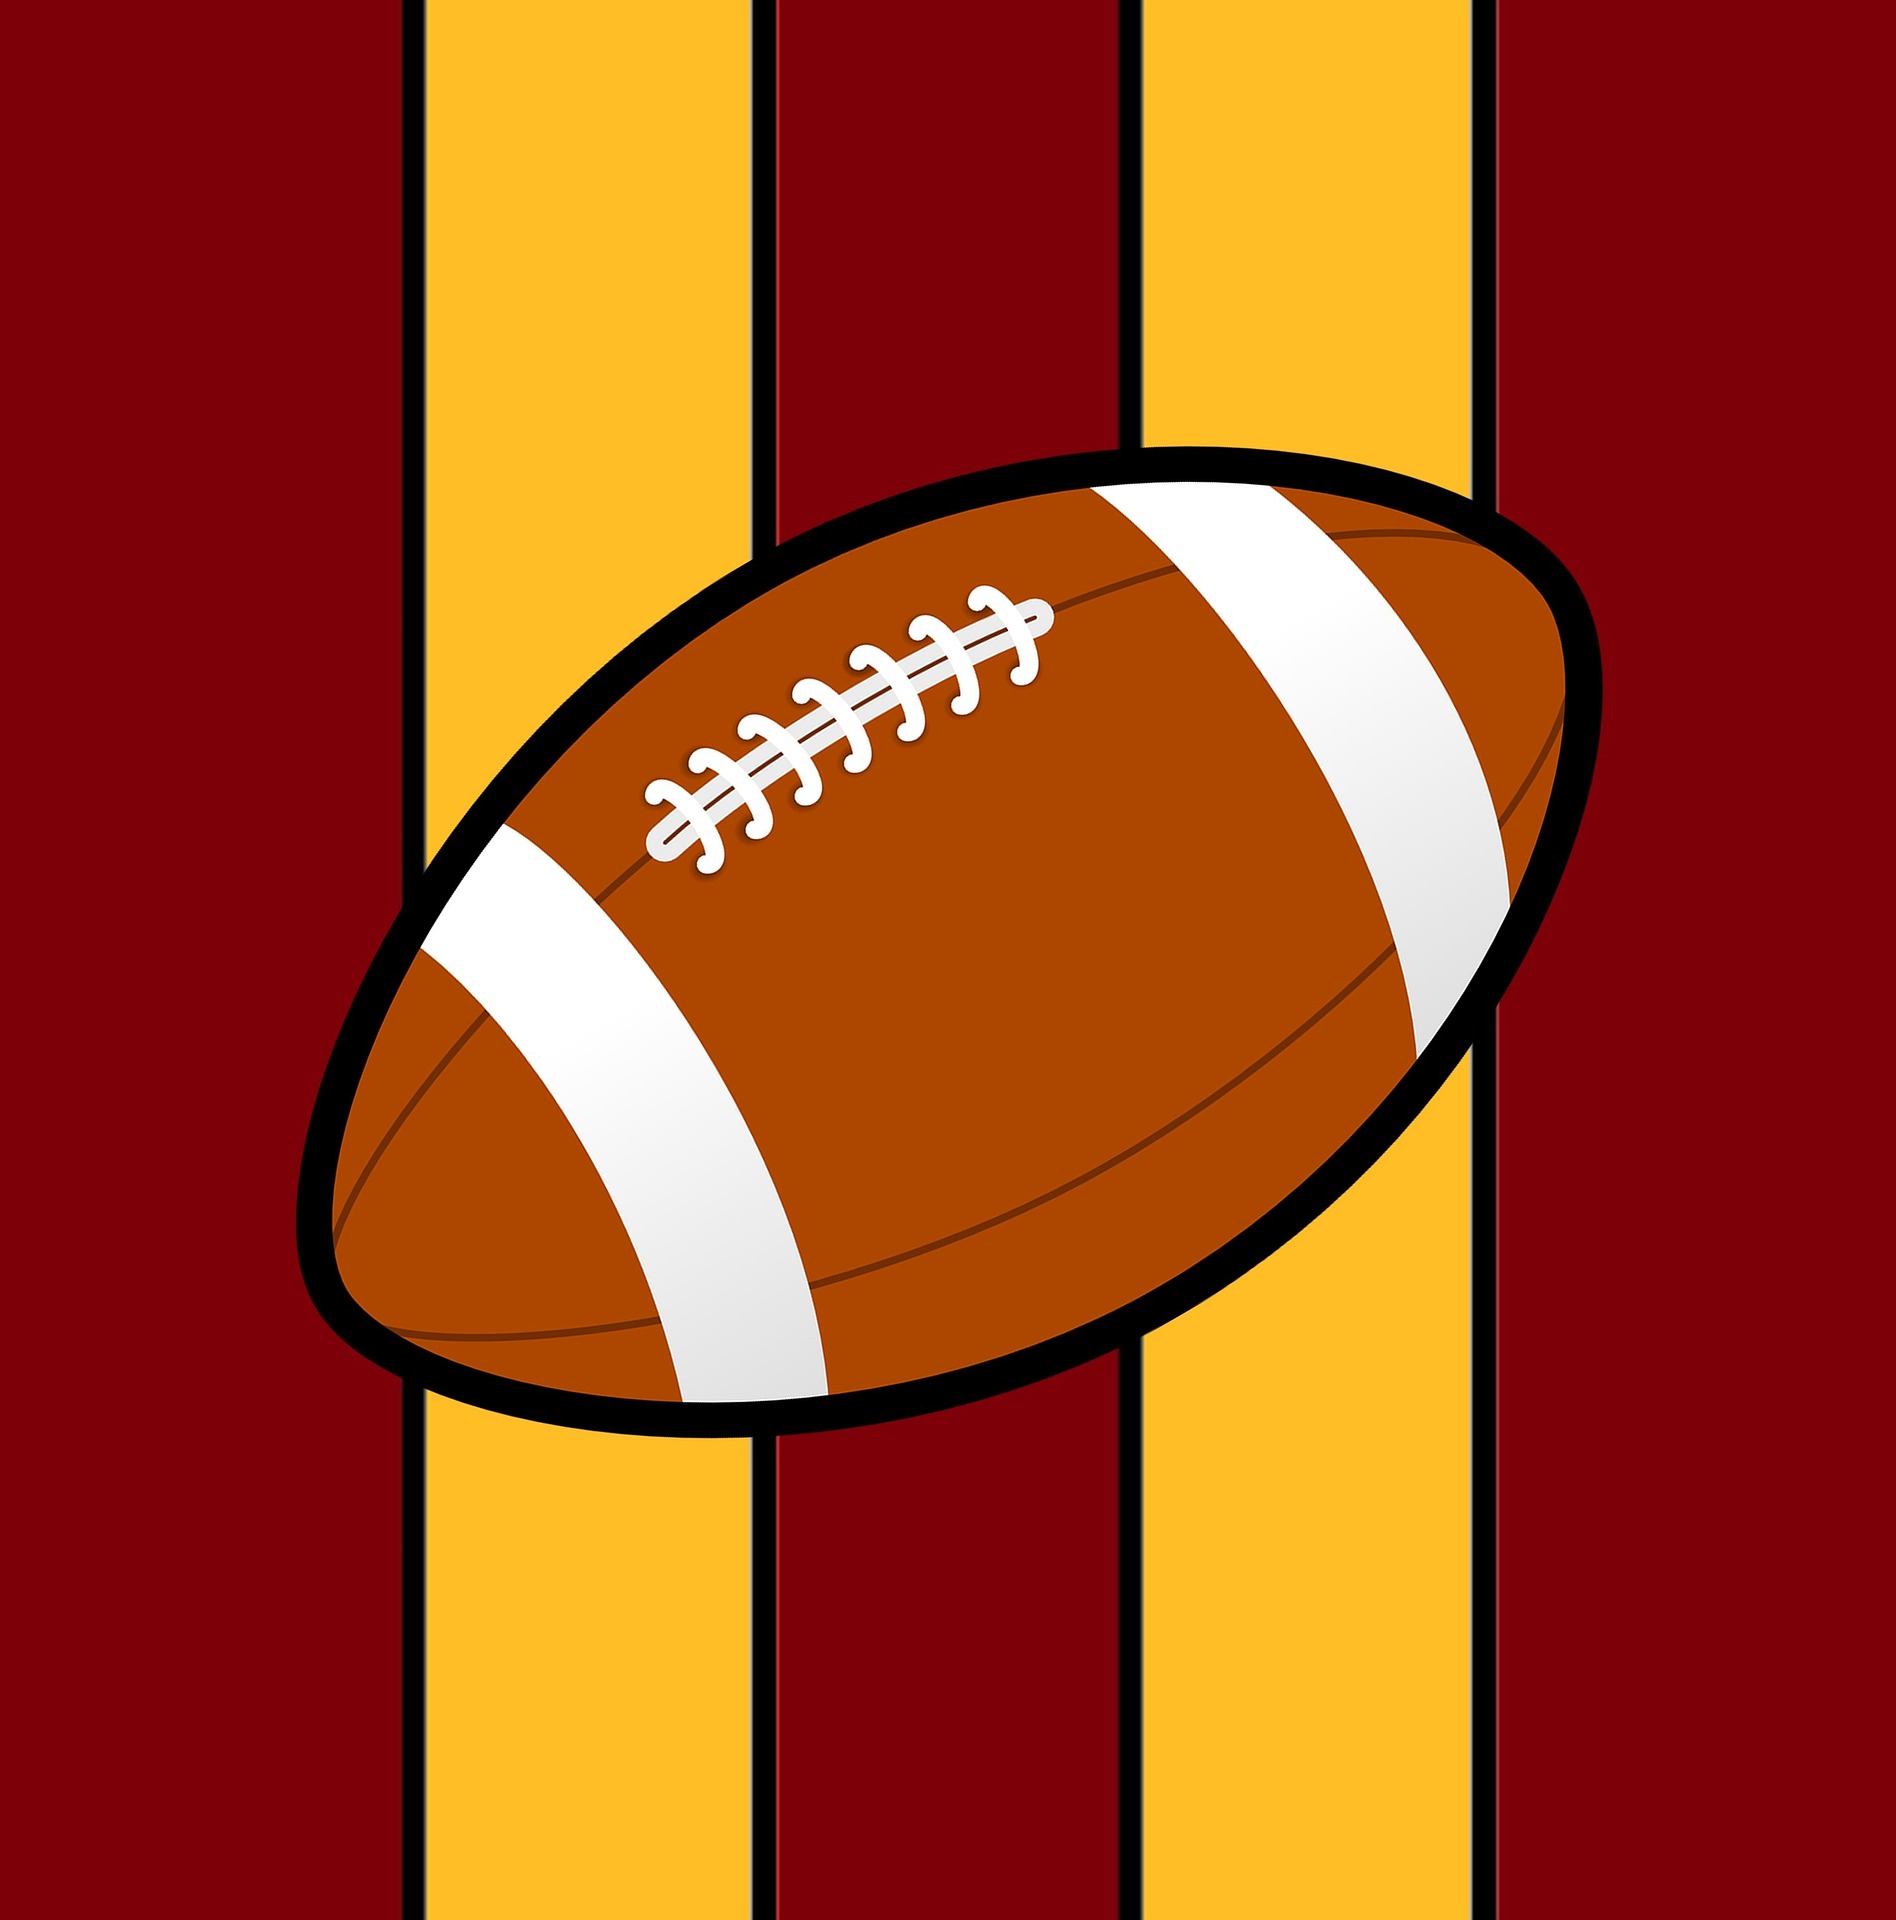 Football in USC colors